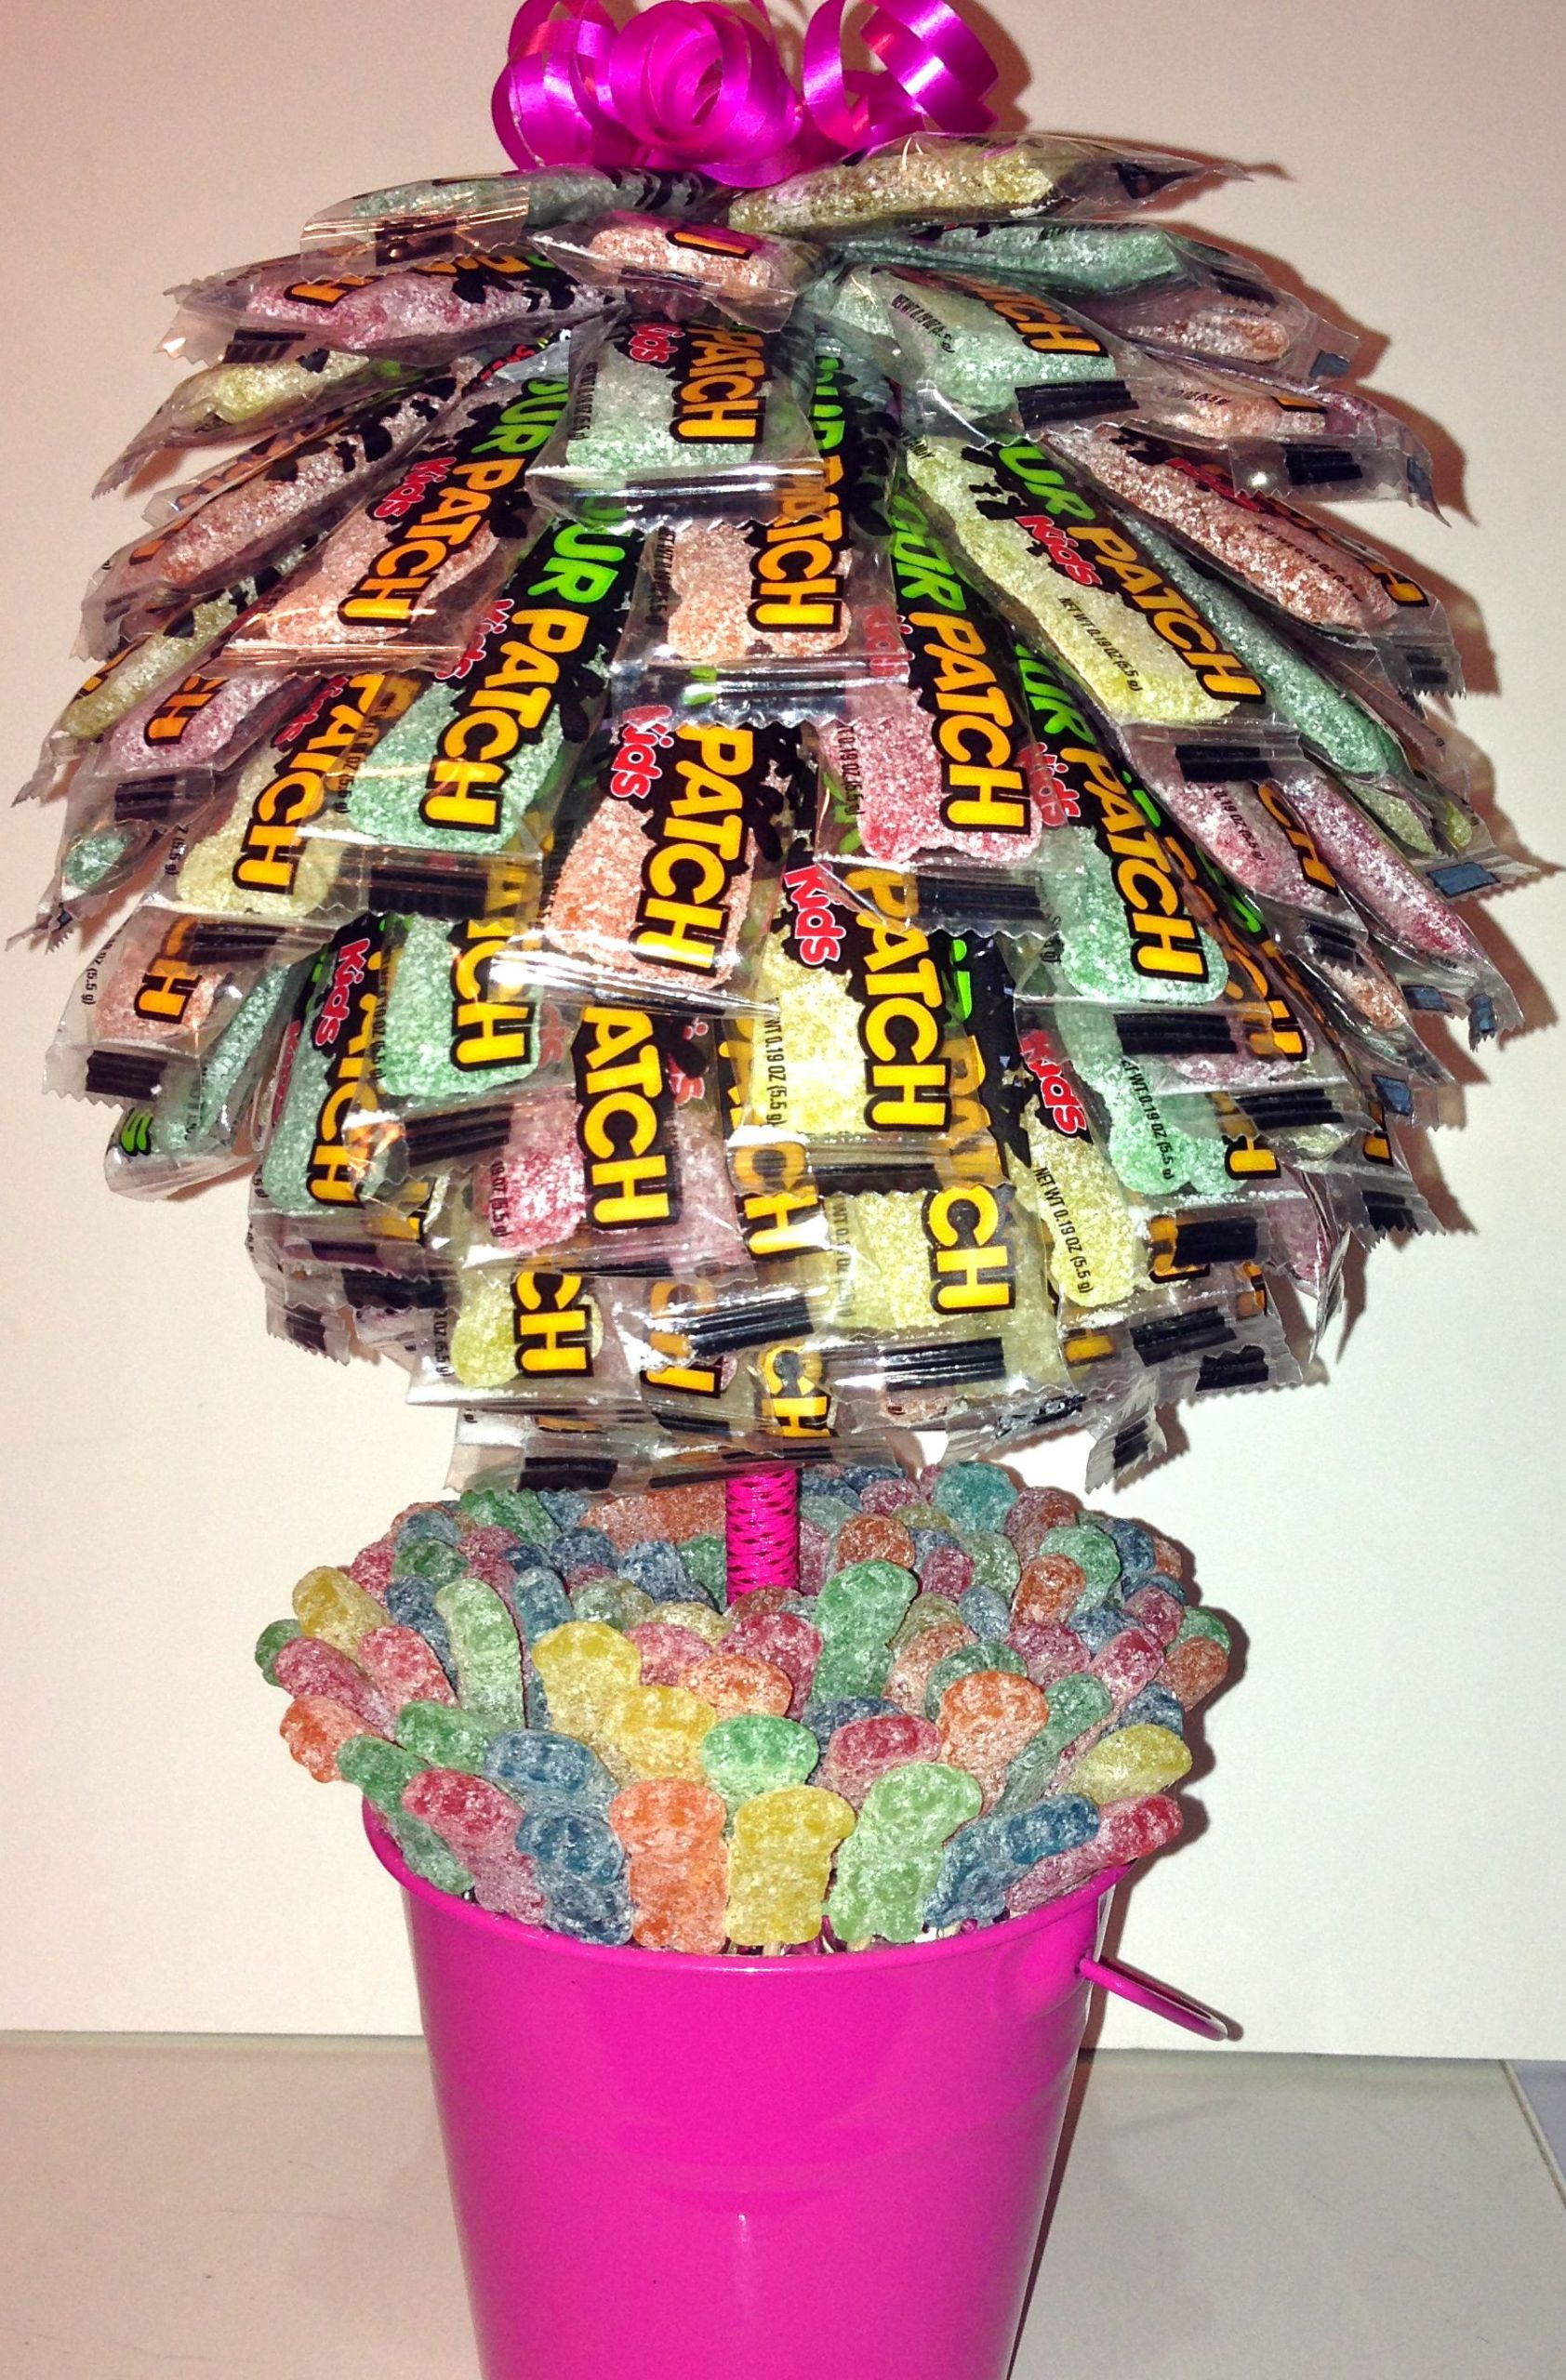 Candy Gift Baskets For Kids
 SOUR PATCH KIDS TOPIARY BOUQUET